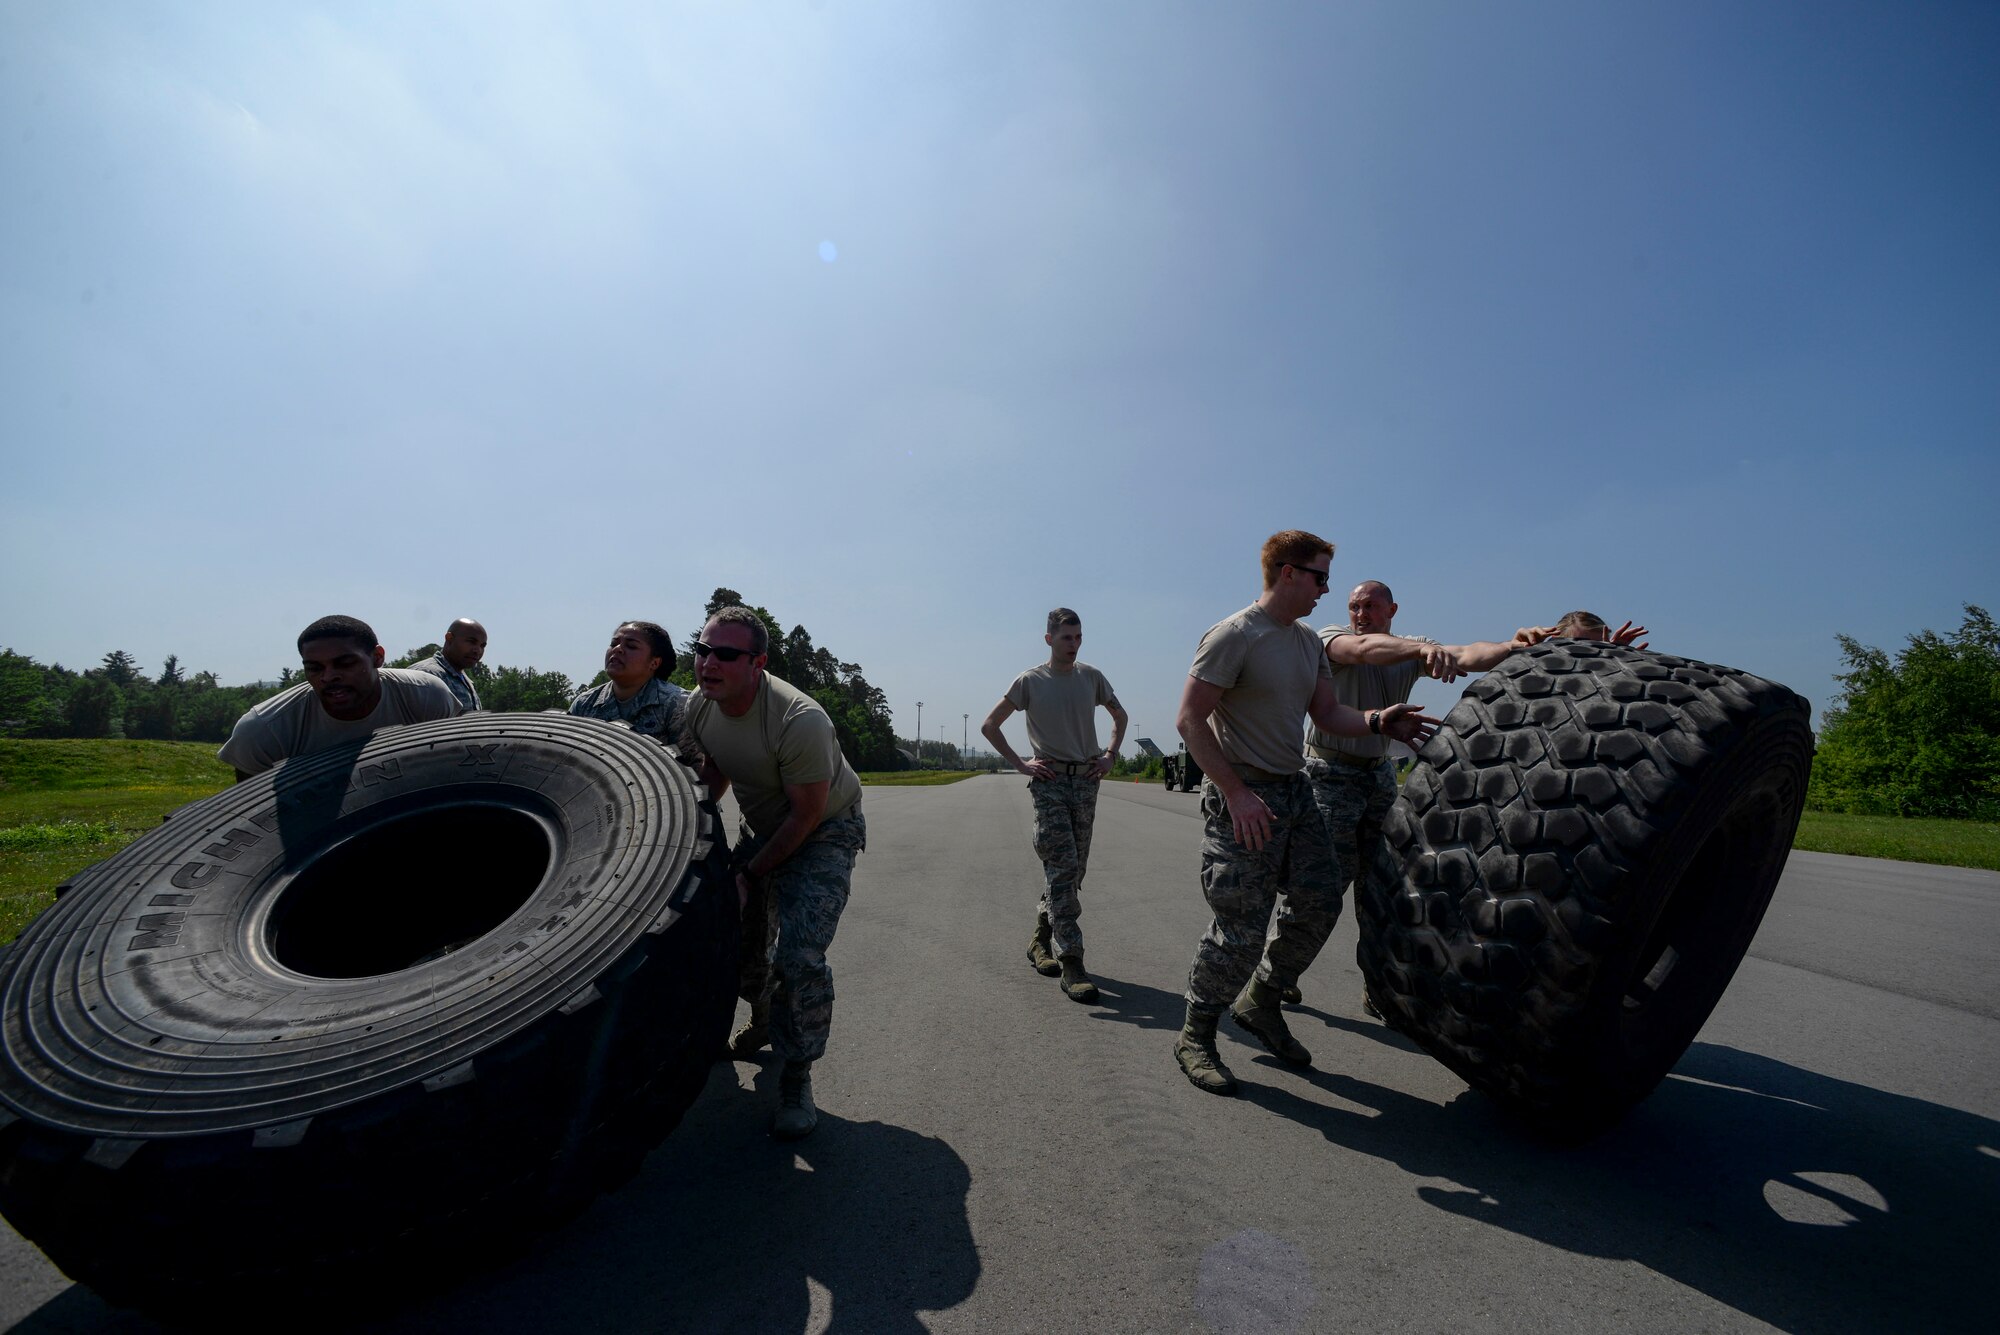 Atlantic Stripe Conference participants flip tires during an obstacle course on Ramstein Air Base, Germany, May 18, 2018. The professional development conference allowed noncommissioned officers time away from official duties to learn from leaders, mentors and guest speakers. (U.S. Air Force photo by Airman 1st Class D. Blake Browning)